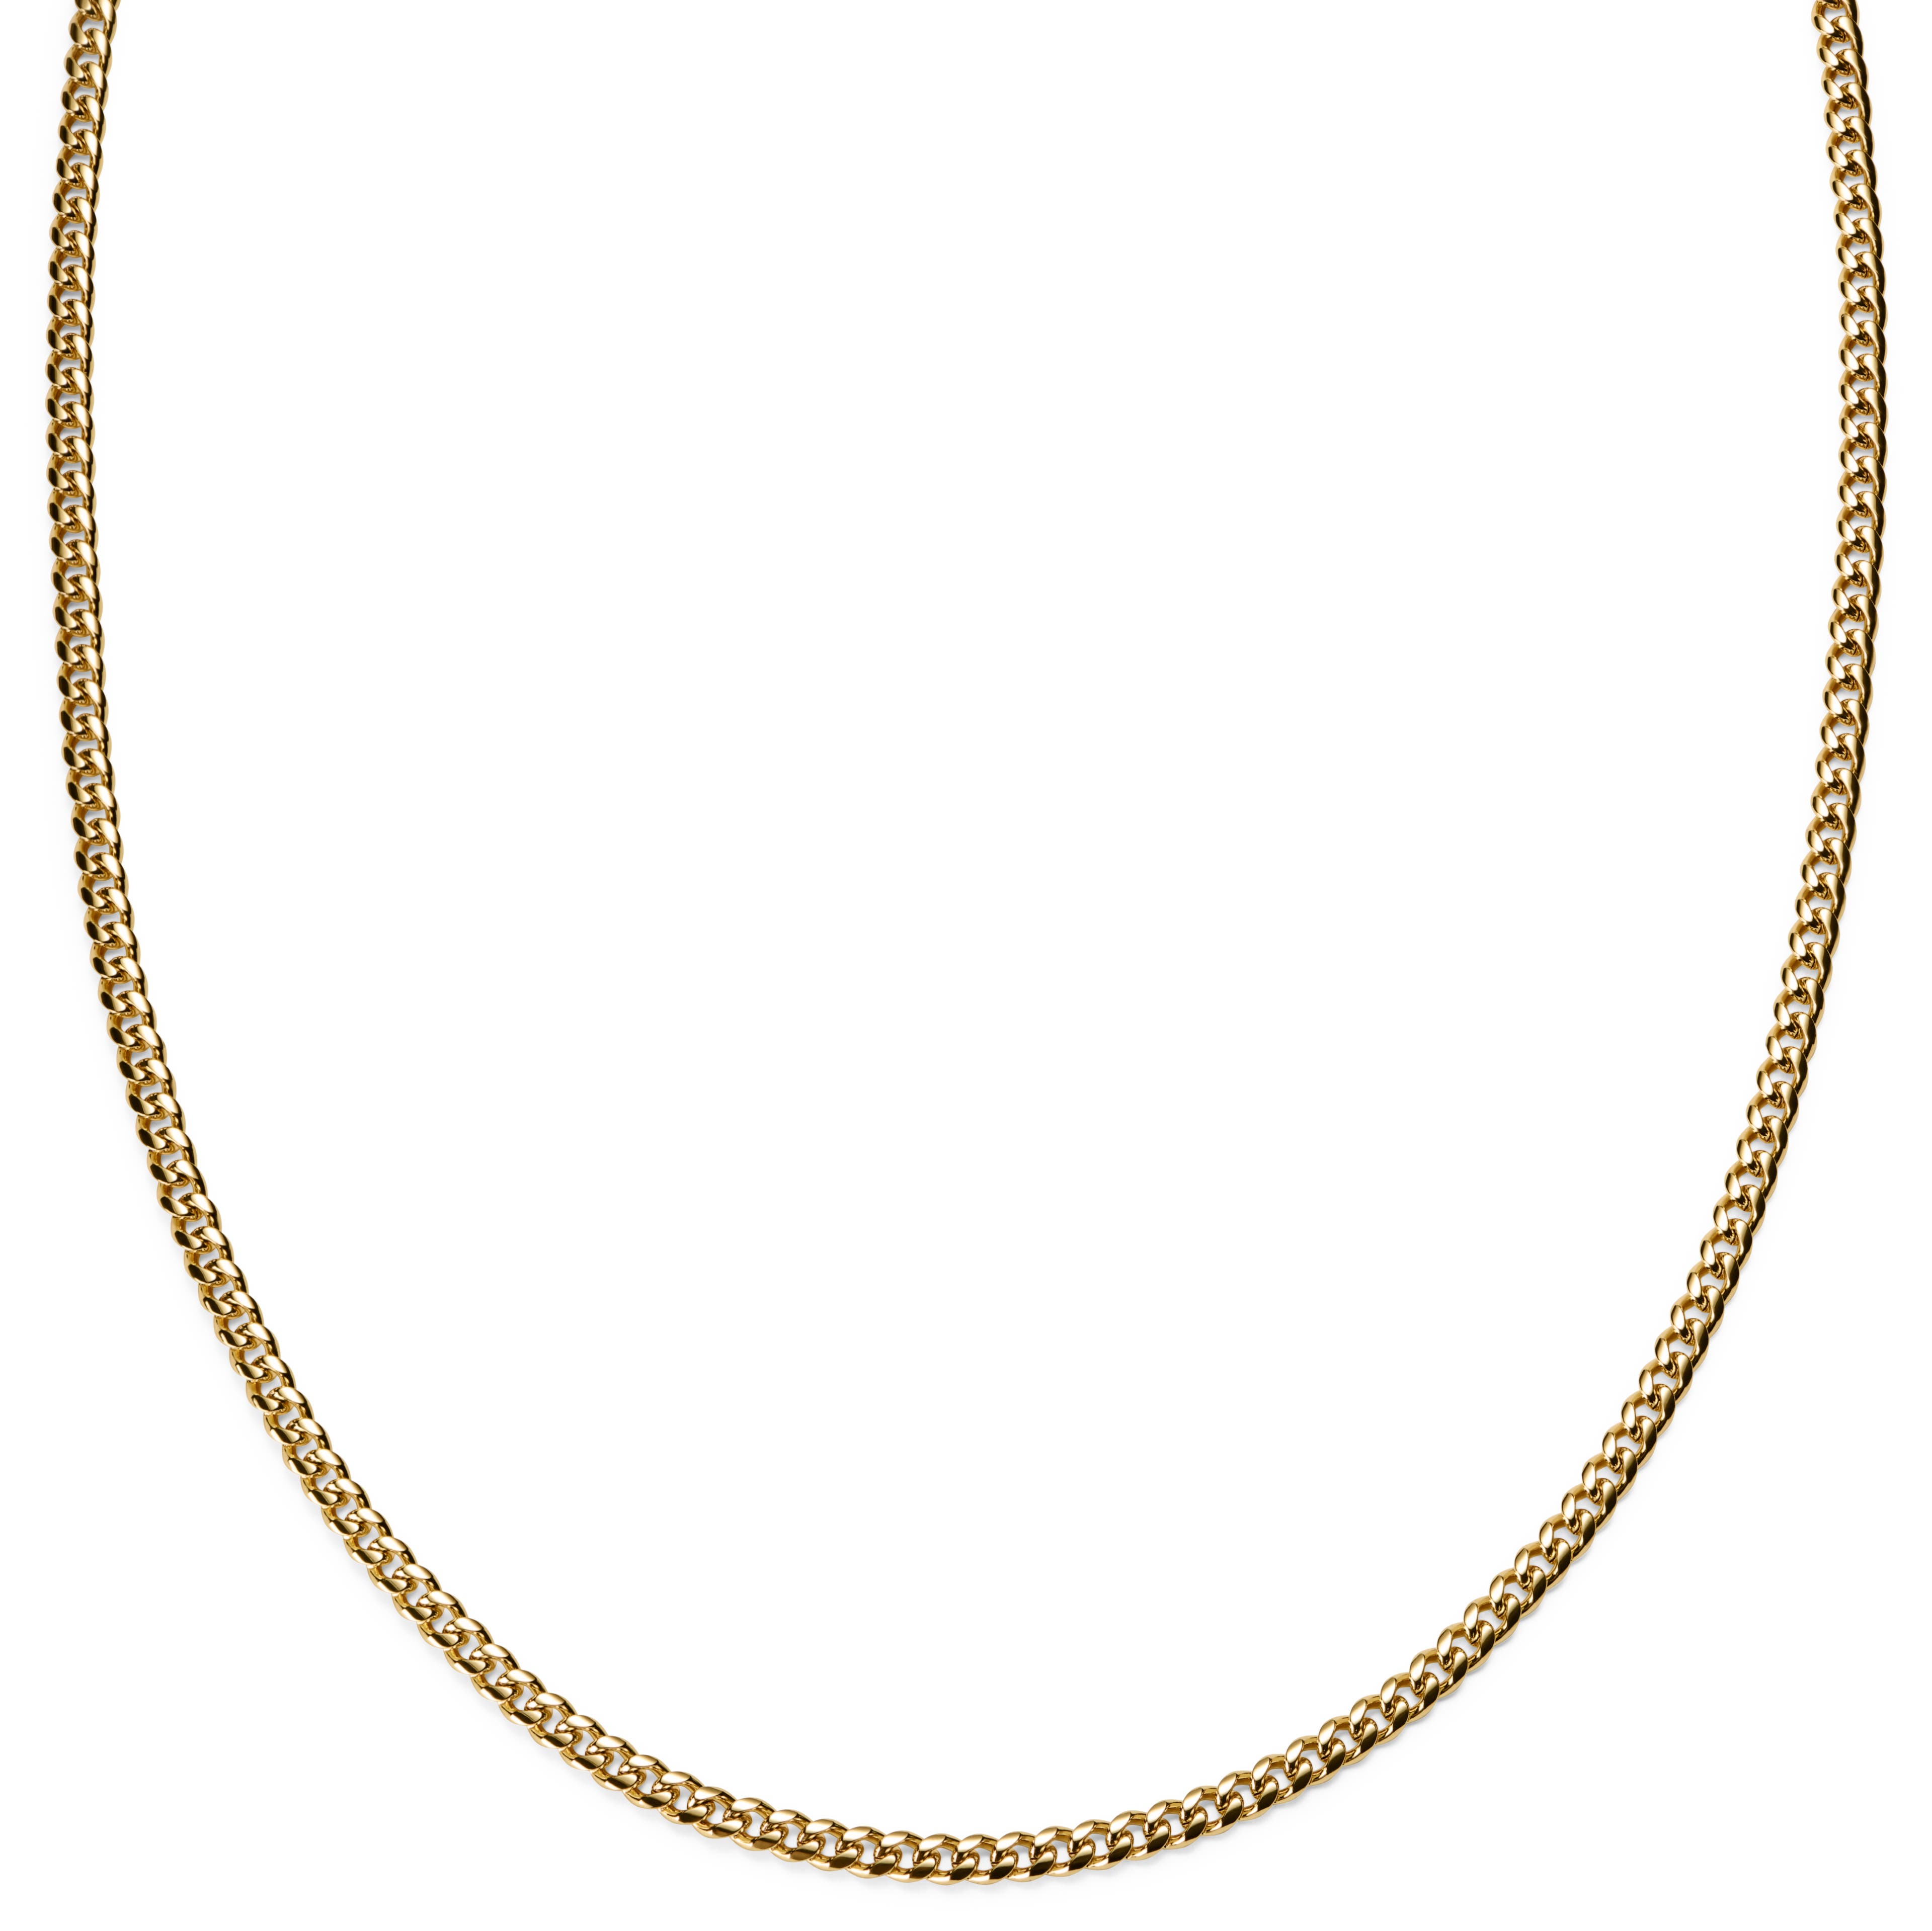 1/8" (3 mm) Gold-Tone Chain Necklace